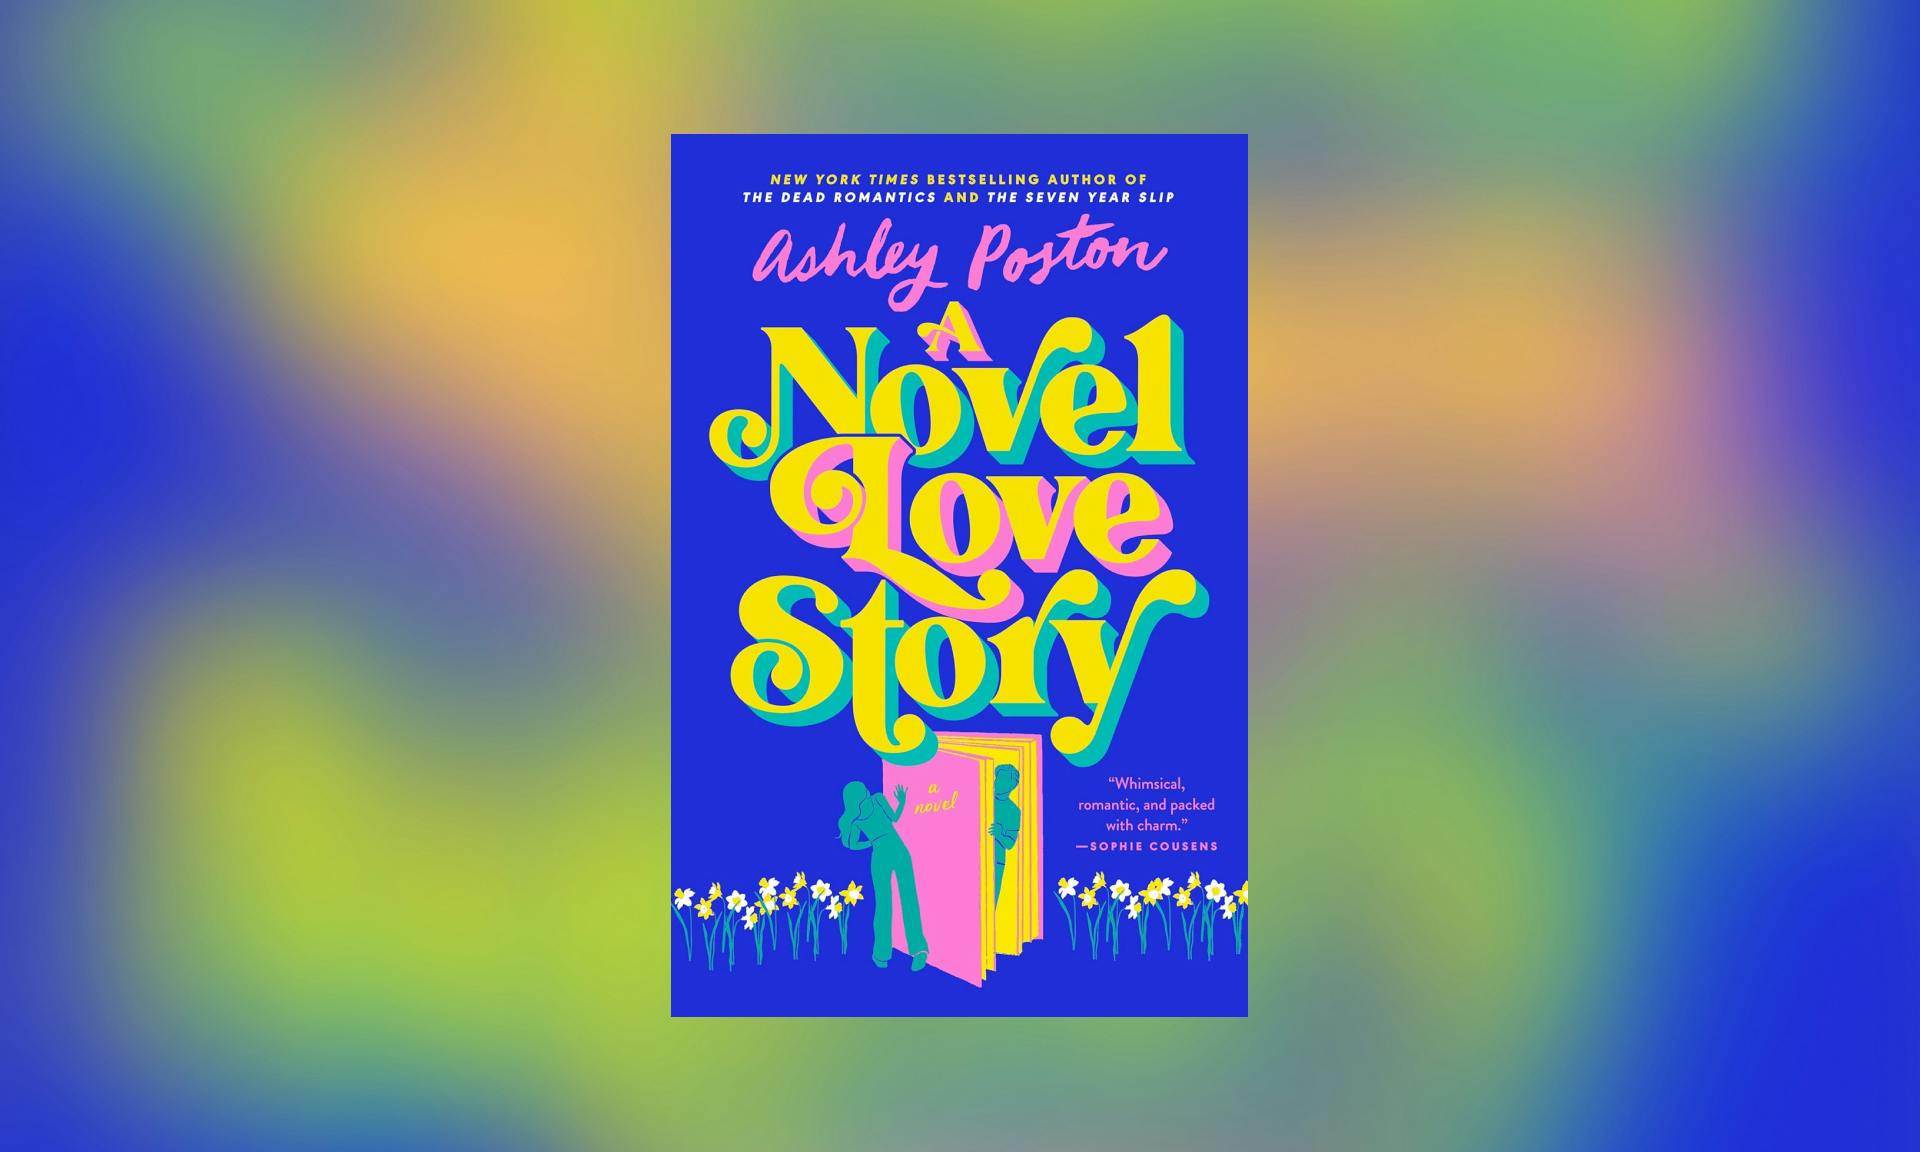 "A Novel Story" book cover